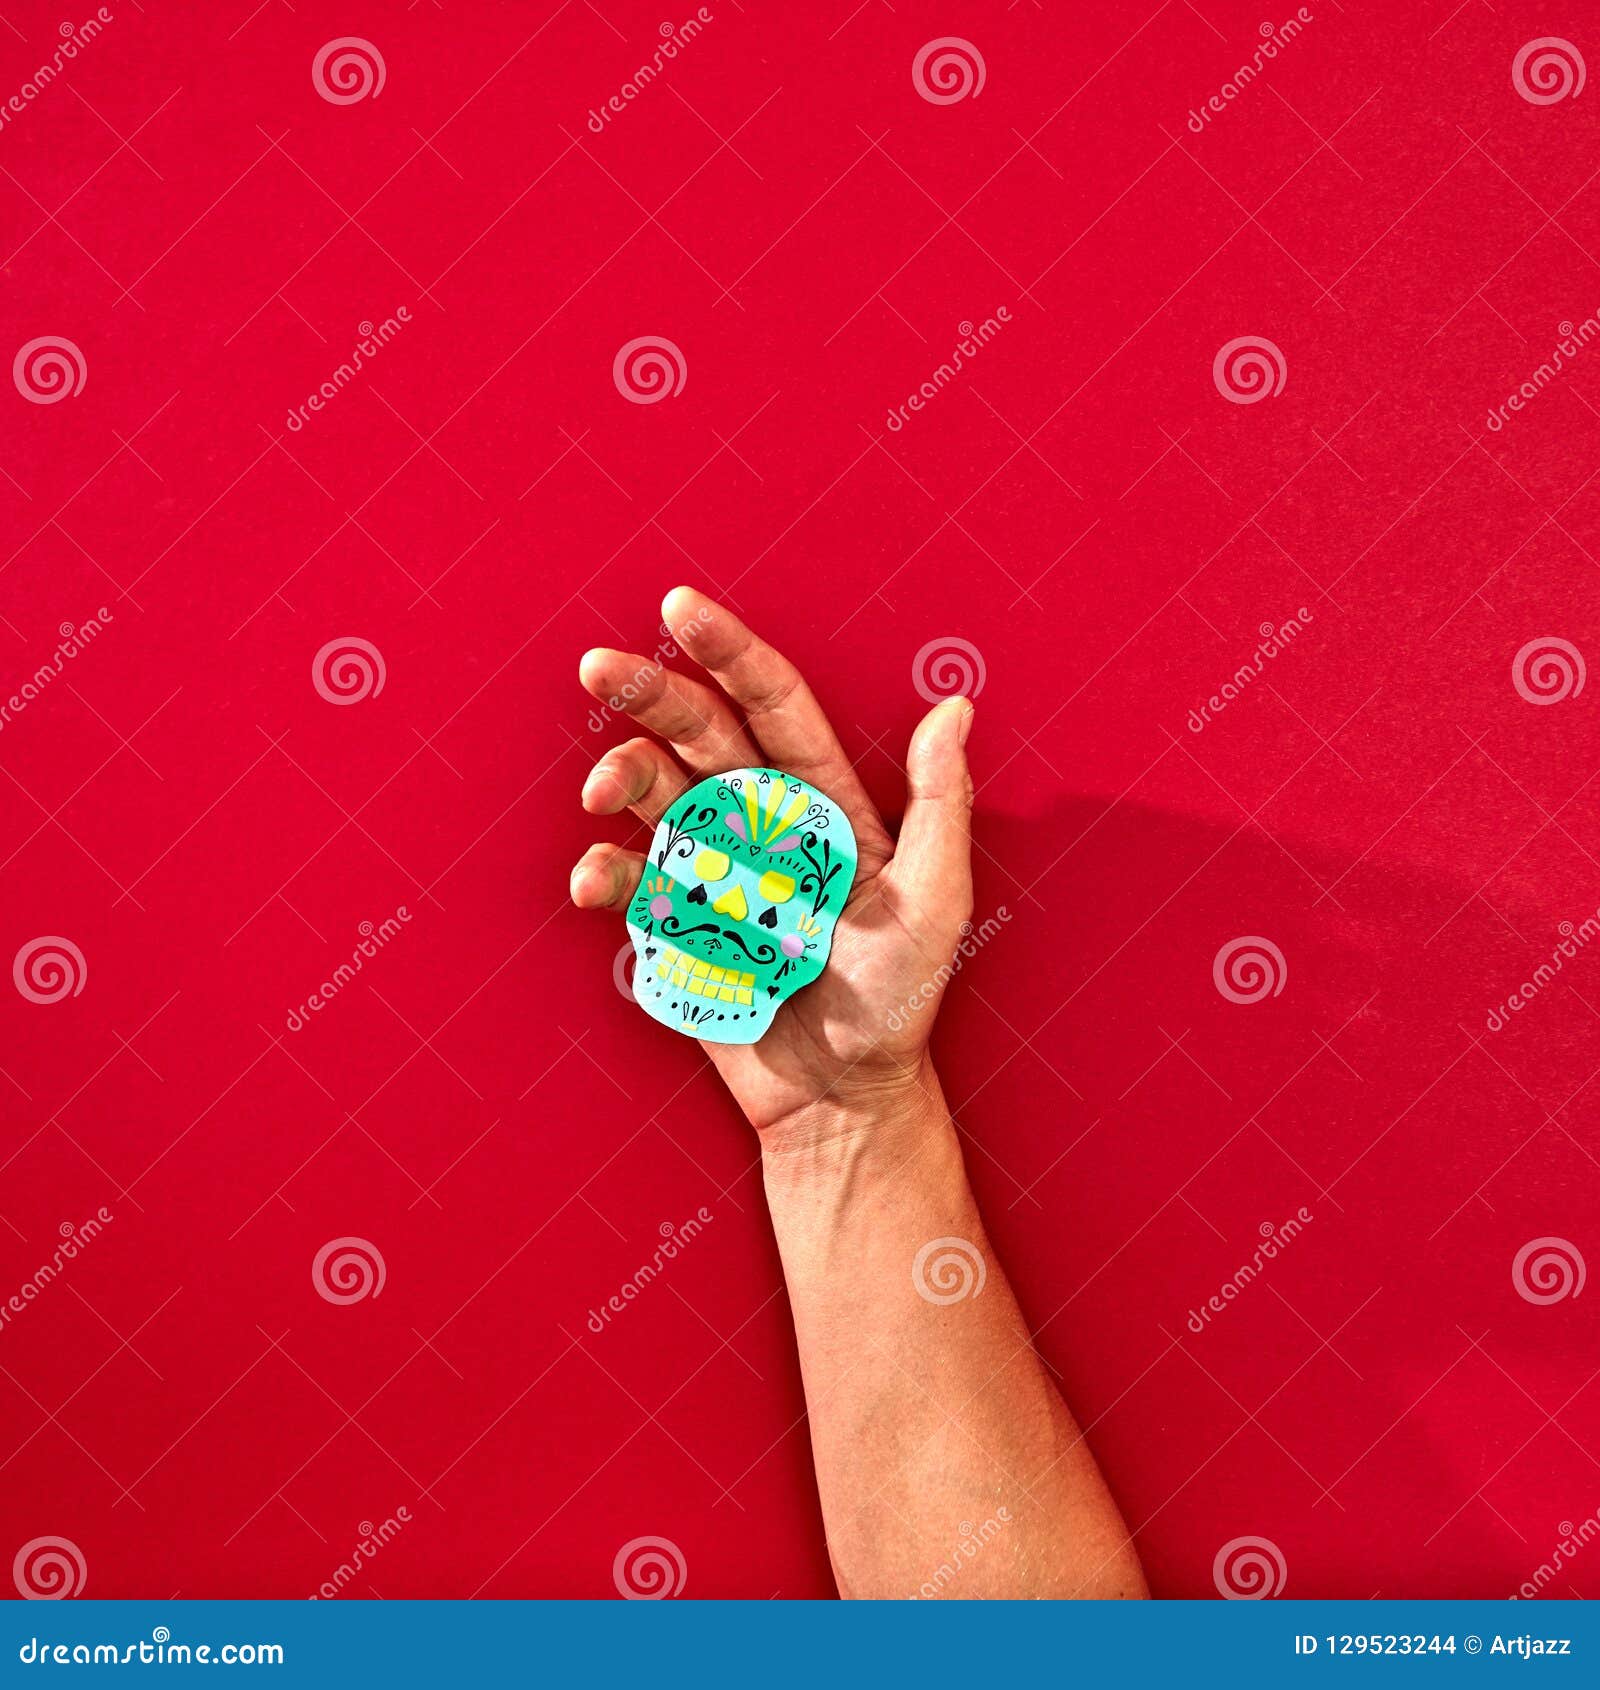 the hand of a man holds a handcraf paper skull calaveras attributes of the mexican holiday calaca on a red background